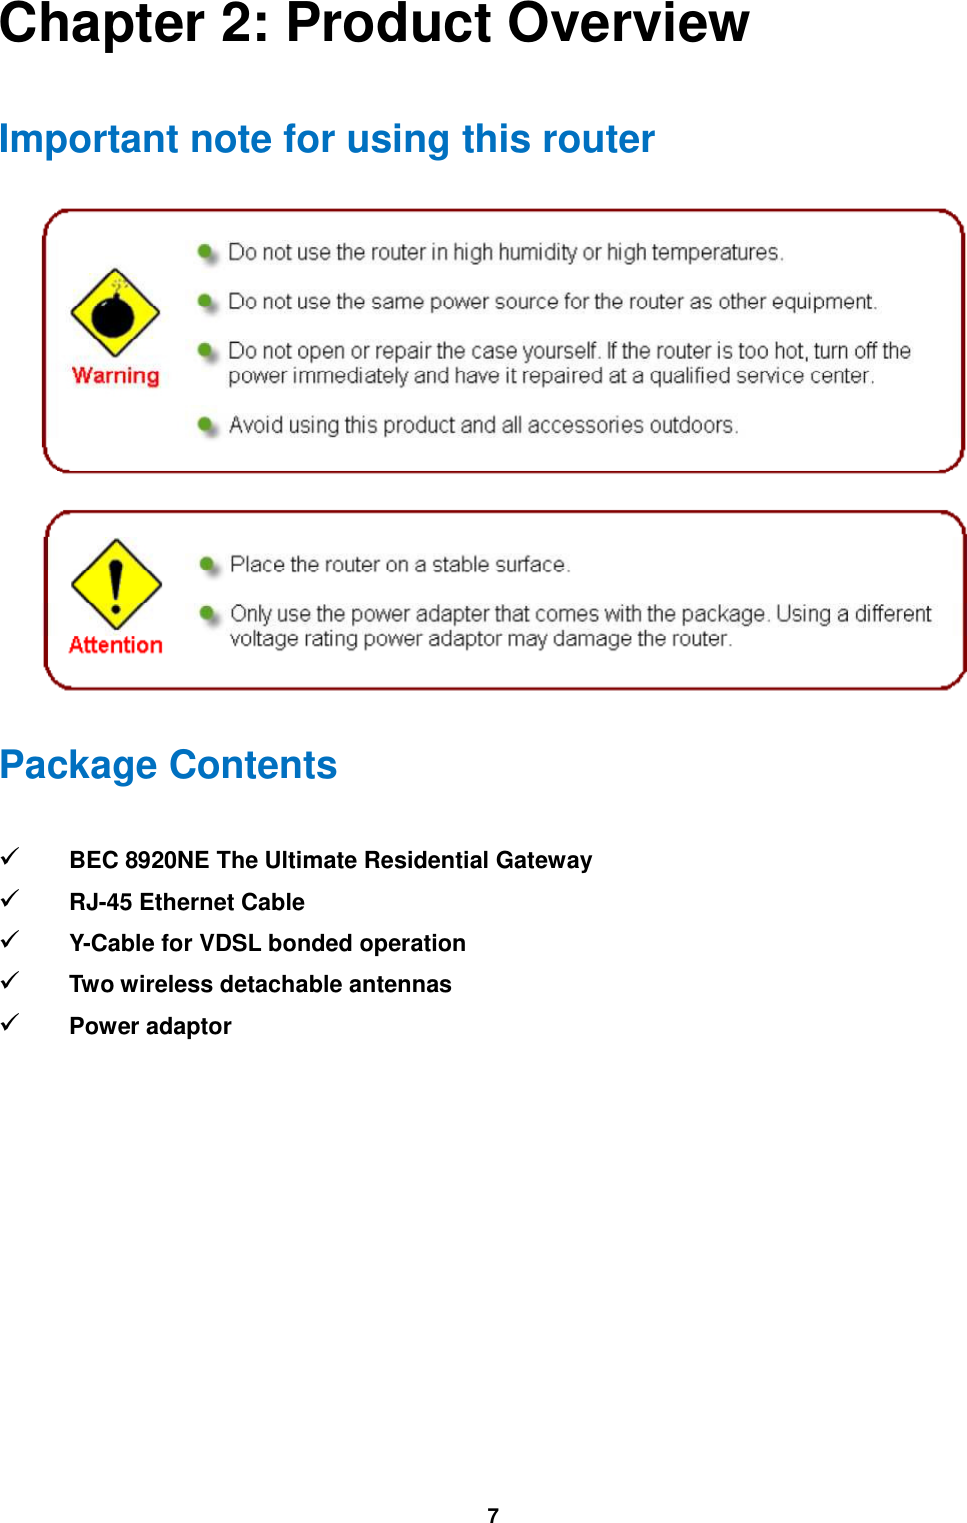  7 Chapter 2: Product Overview Important note for using this router   Package Contents  BEC 8920NE The Ultimate Residential Gateway   RJ-45 Ethernet Cable  Y-Cable for VDSL bonded operation  Two wireless detachable antennas  Power adaptor    